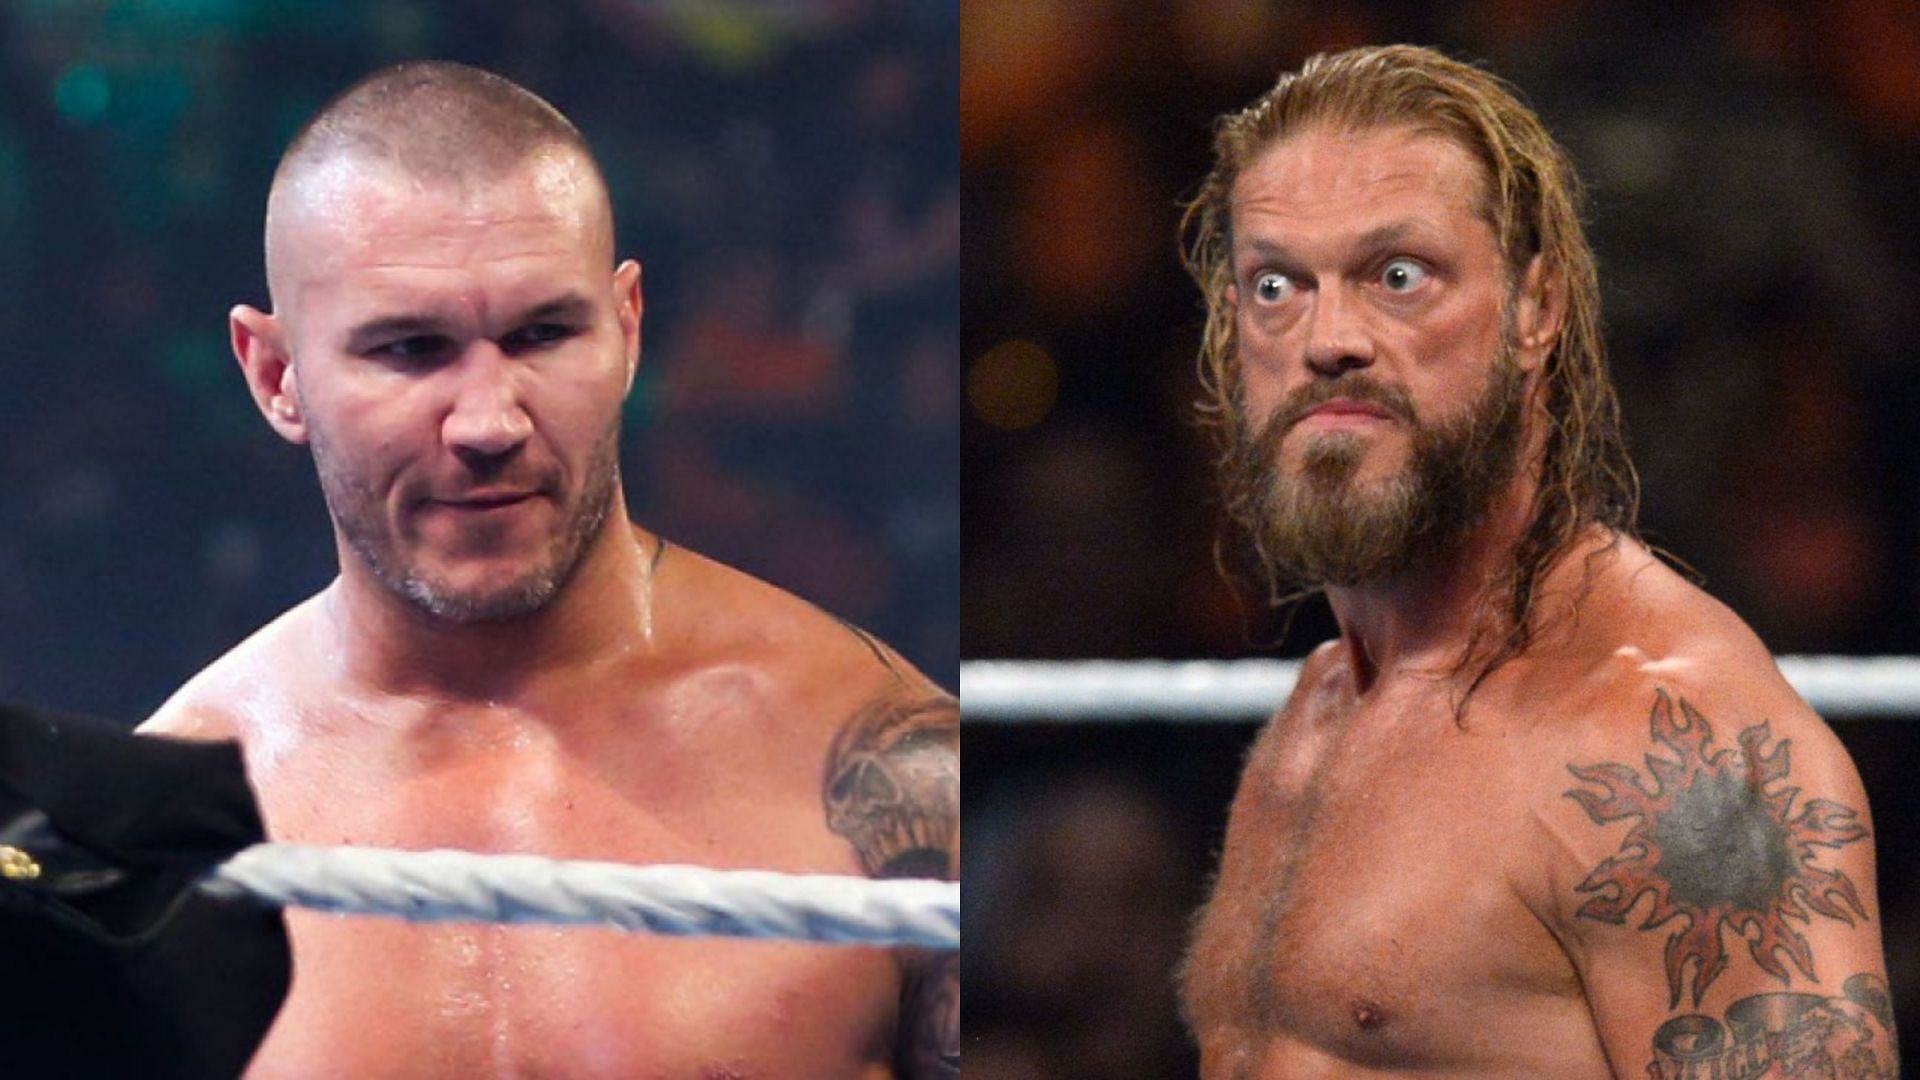 Randy Orton (left) and WWE Hall of Famer Edge (right)